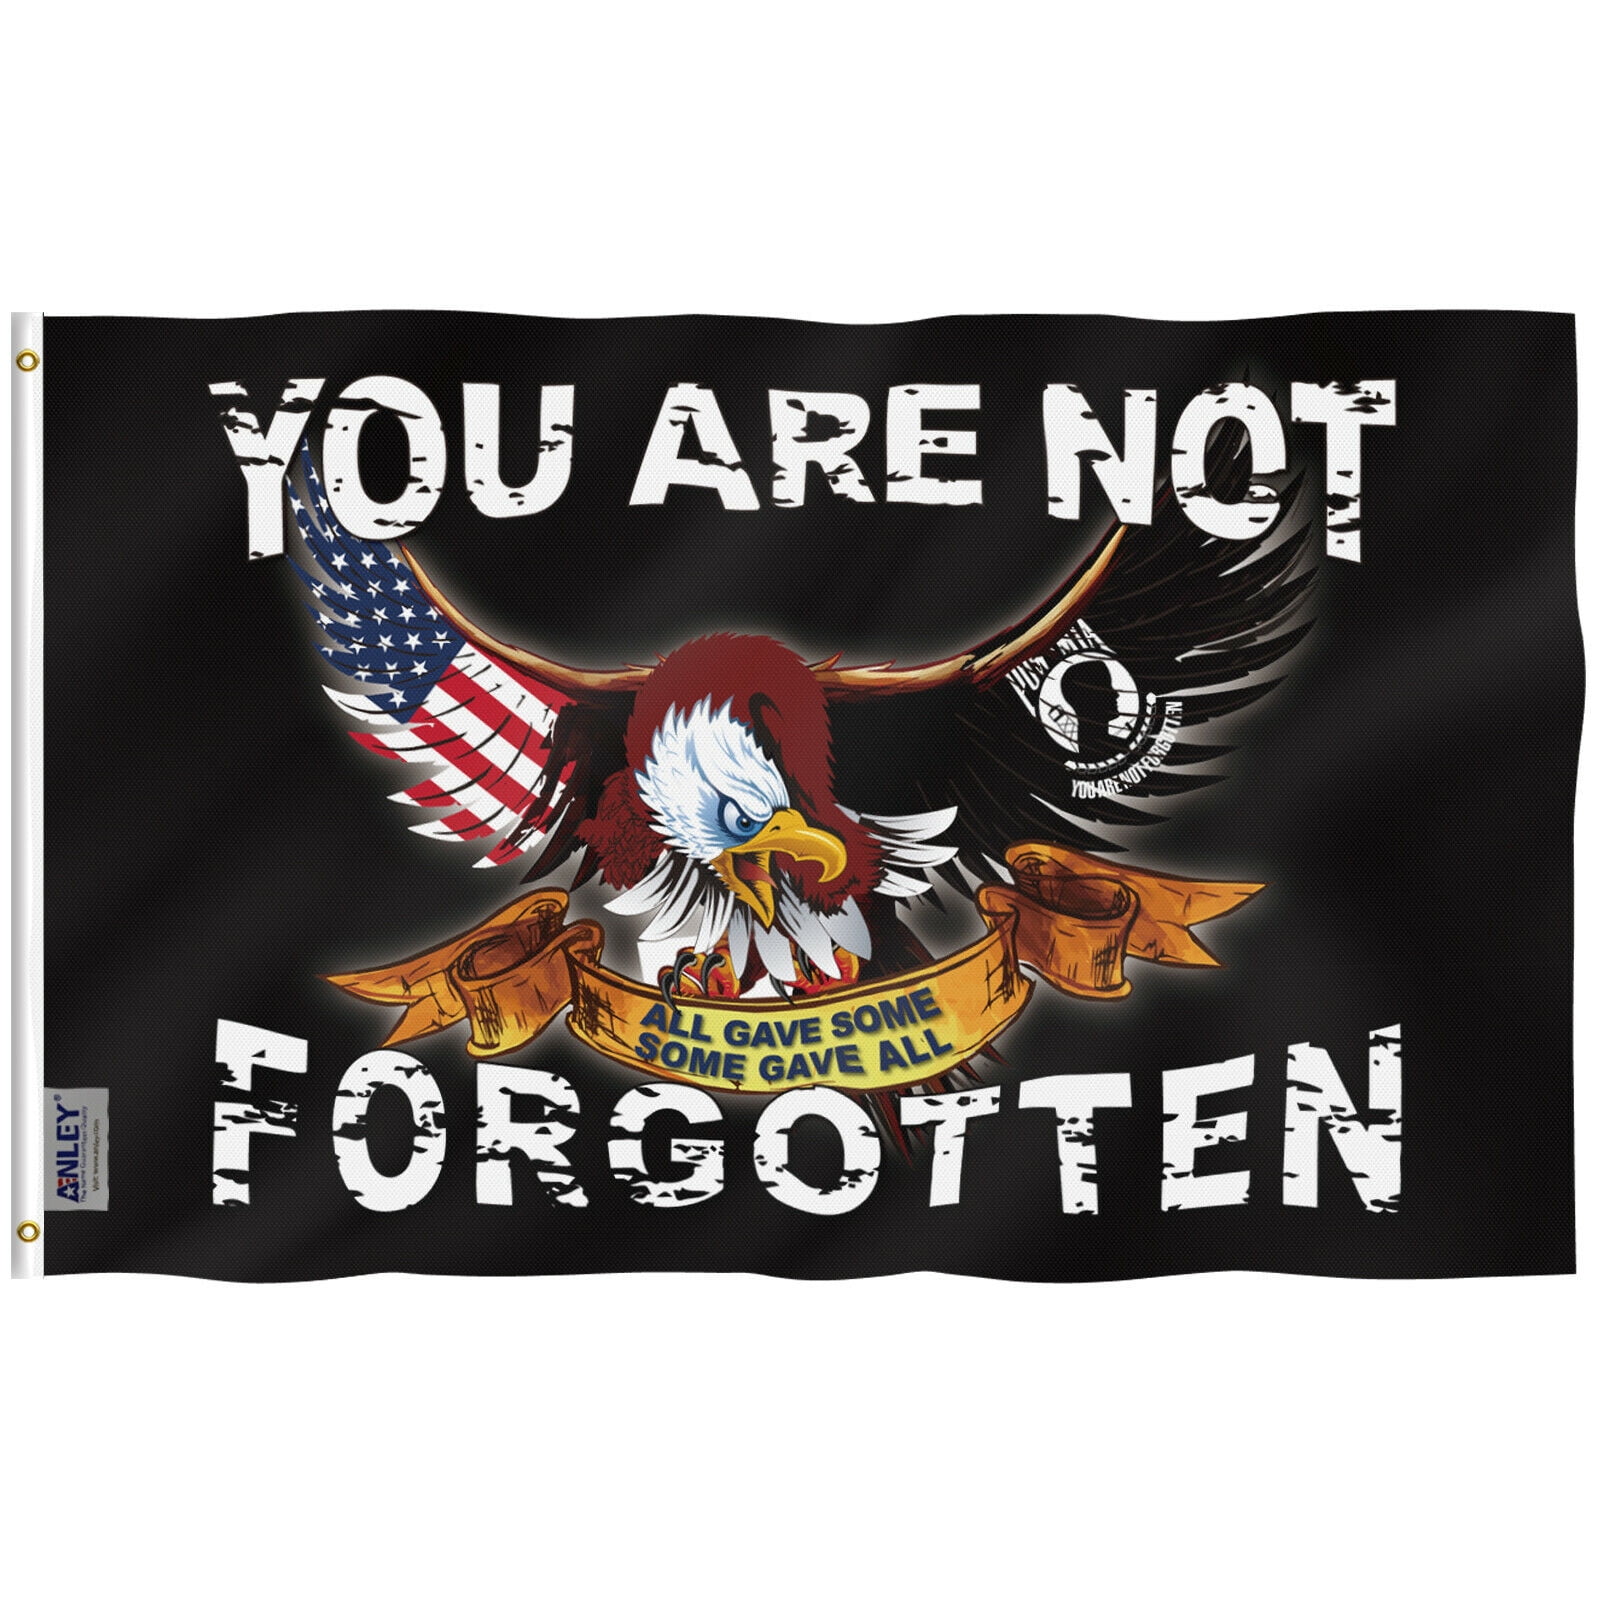 High Quality 3x5 Pow Mia POWMIA You are never Forgotten Black Double Sided Flag Banner